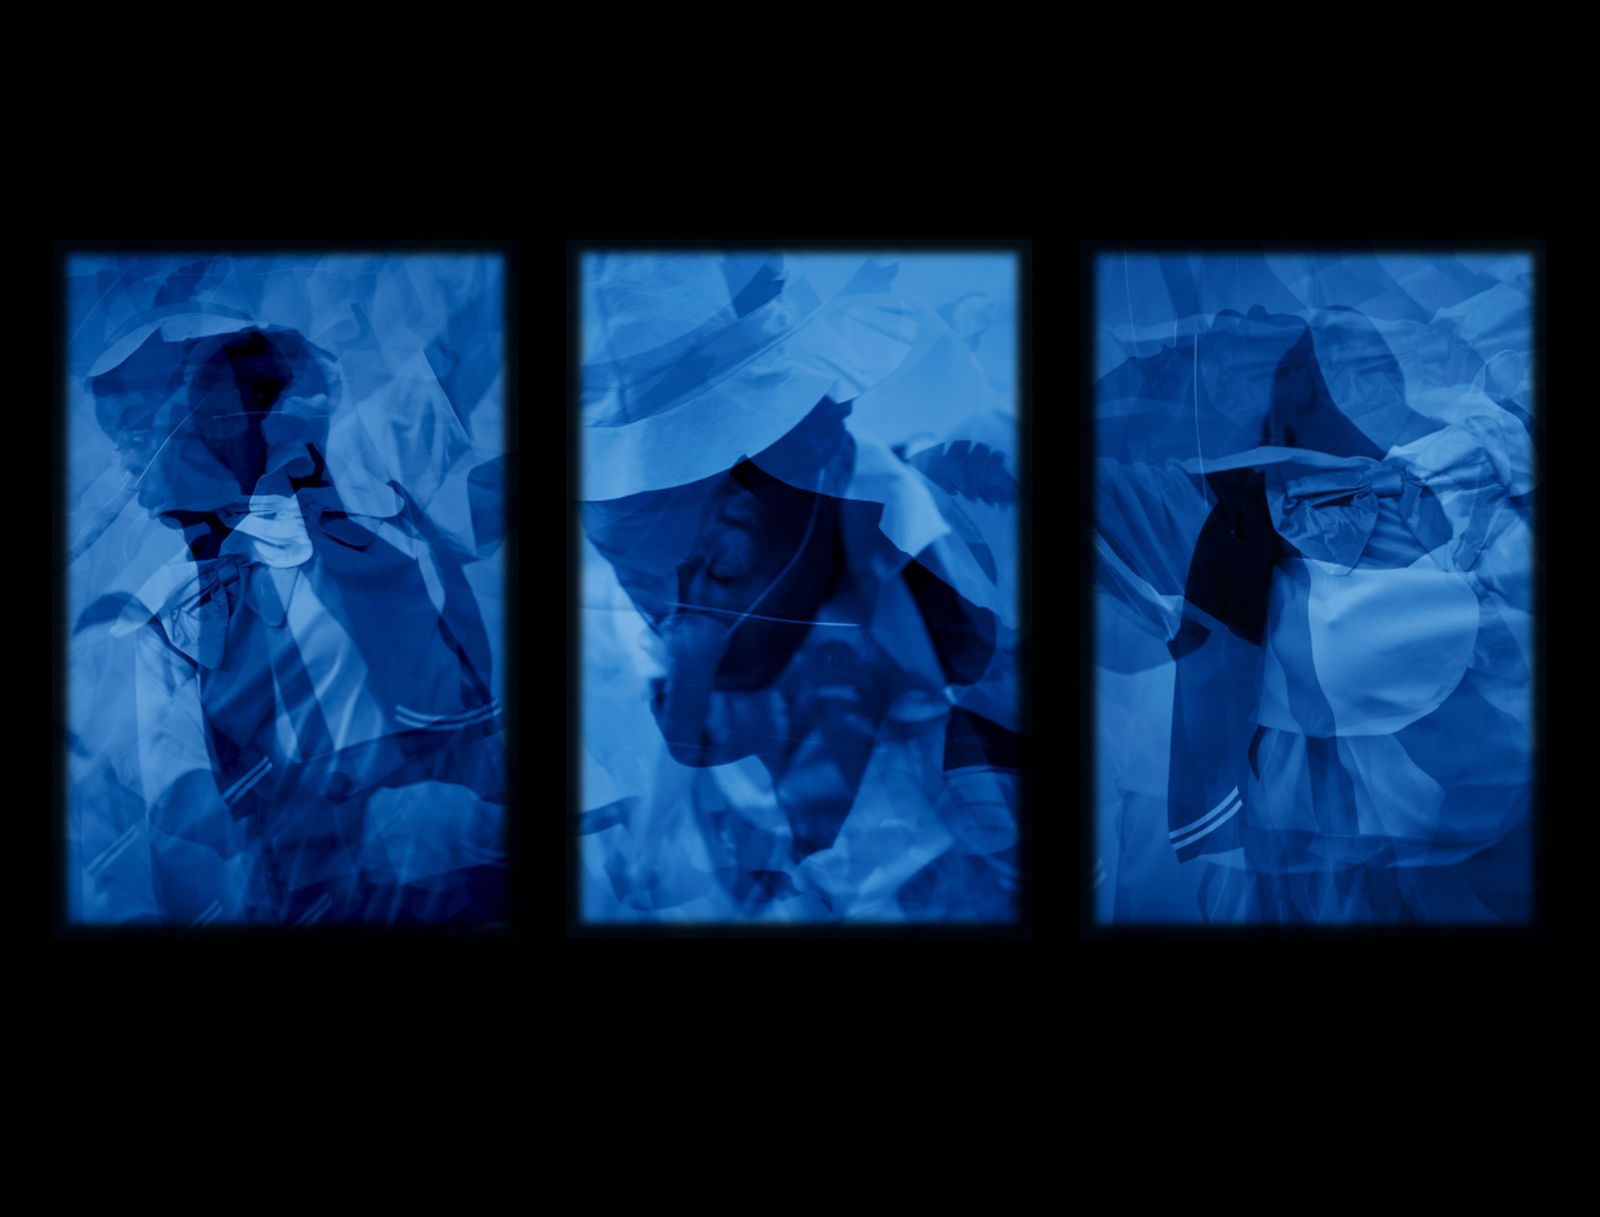 © Heather Agyepong - Only Pino (Triptych) ego death, Commissioned by Jerwood Arts & Photoworks, 2022